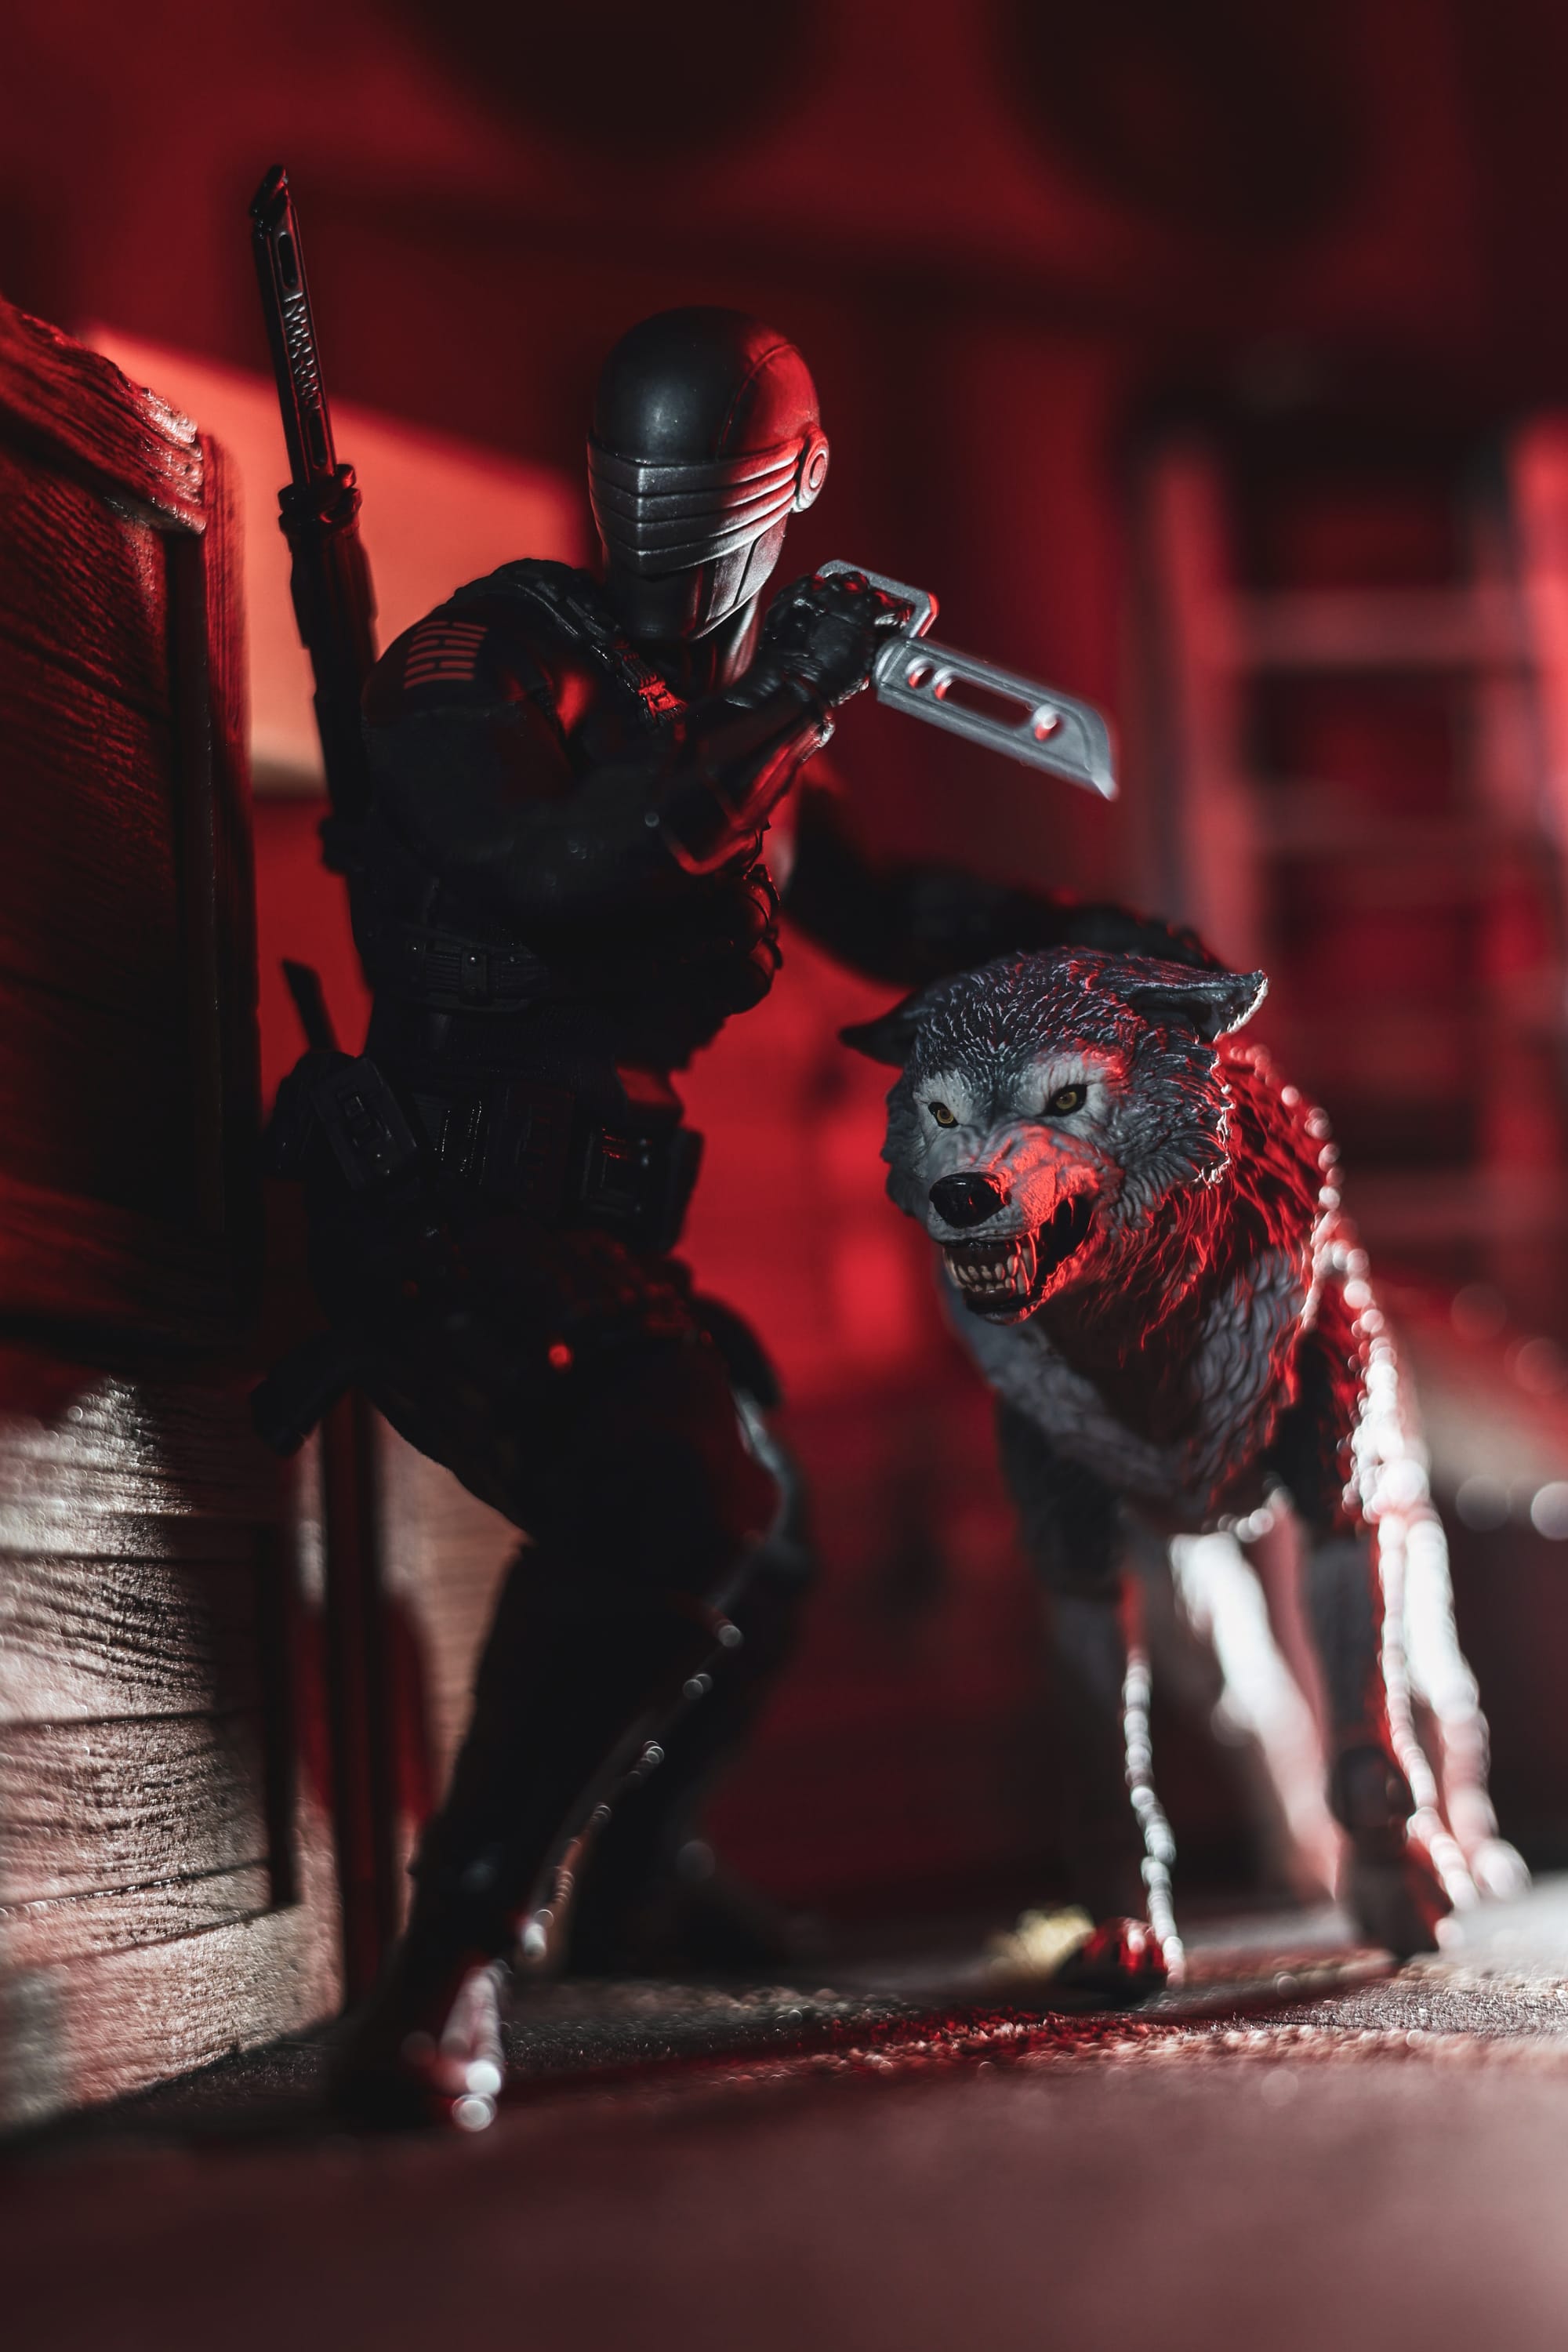 FAN FEATURE FRIDAY #170 - SNAKE EYES EDITION